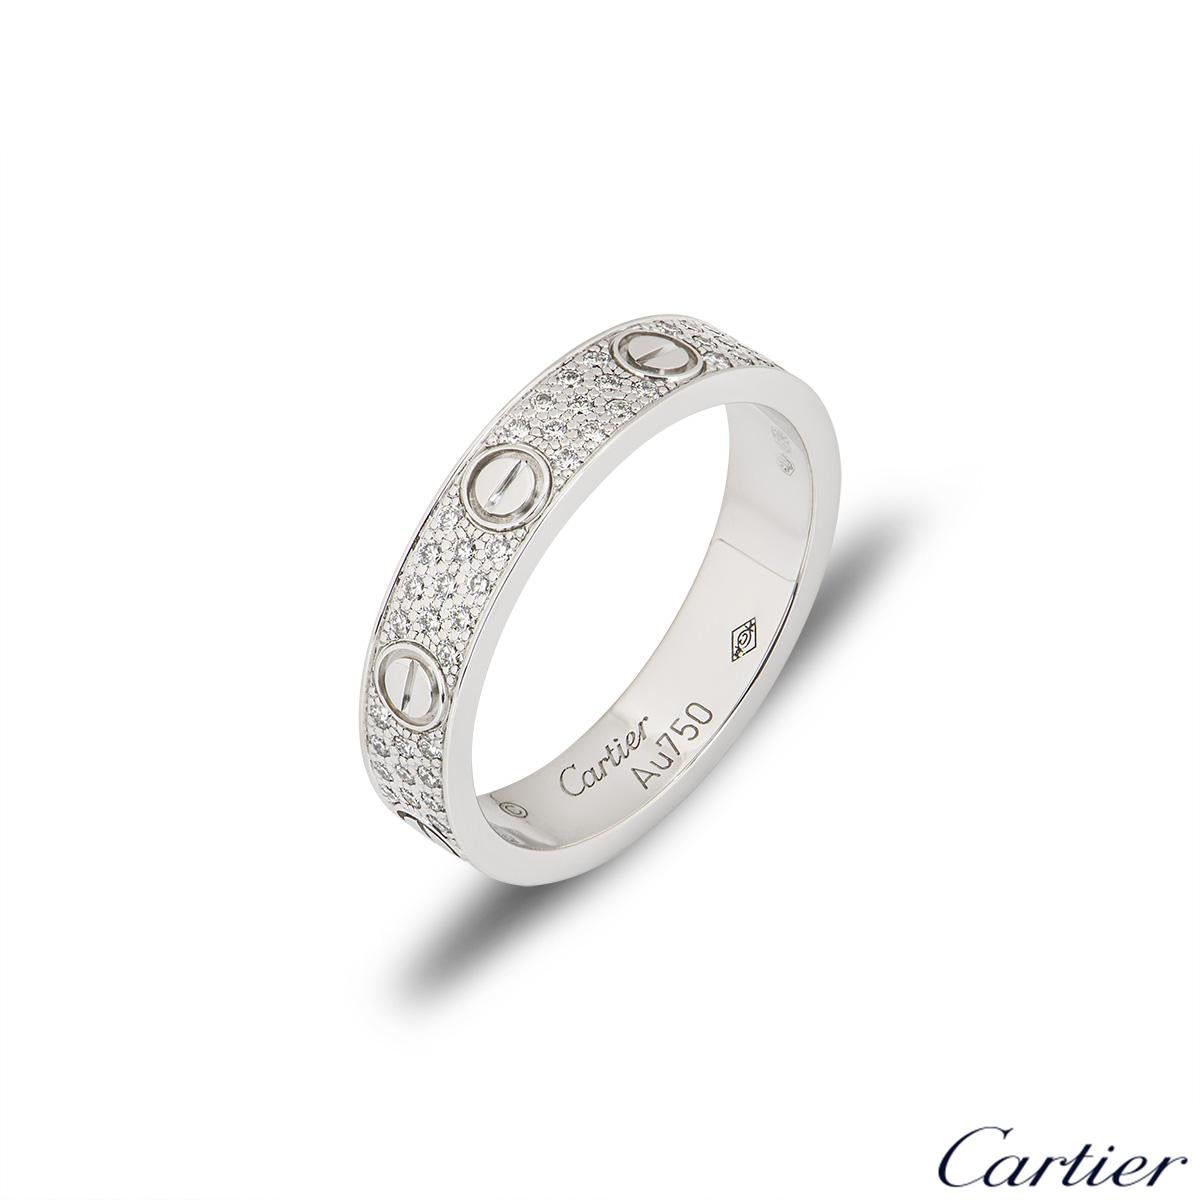 An 18k white gold Cartier diamond pave ring from the Love collection. The ring comprises of the iconic screw motifs displayed around the outer edges with 88 round brilliant cut diamonds totalling 0.31ct set between each screw motif. The ring